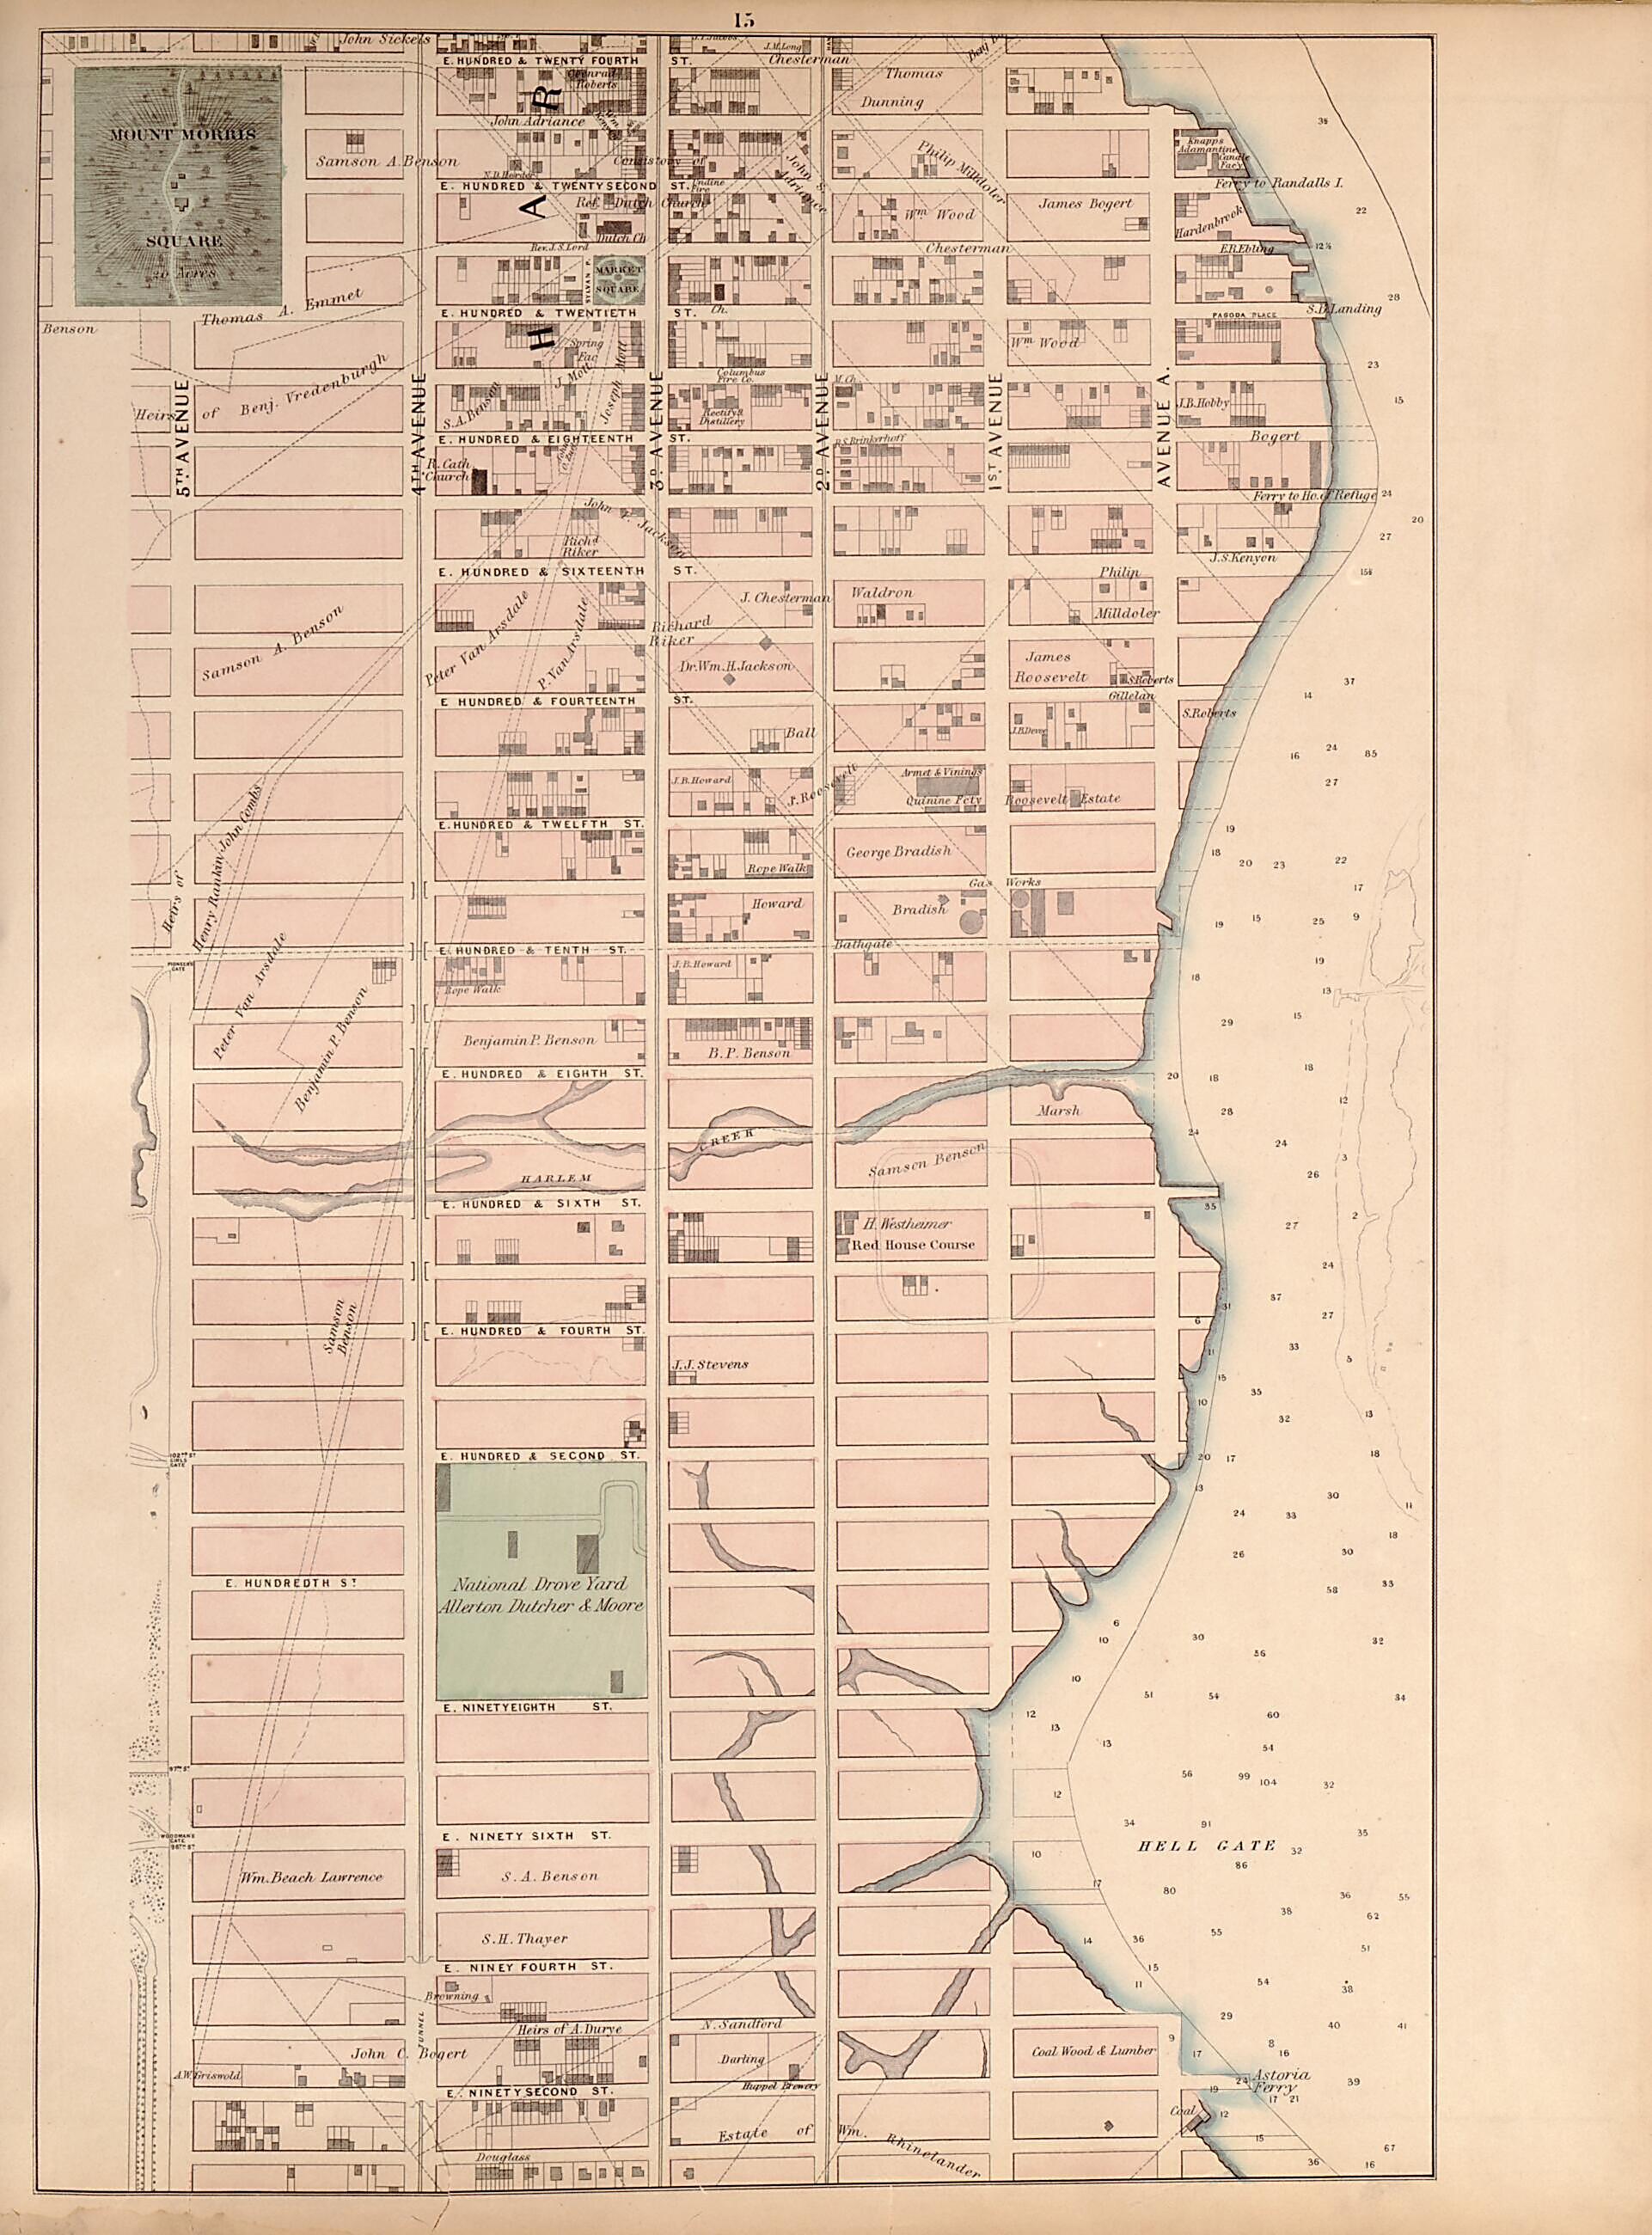 This old map of Plate 15 from Plan of New York City from the Battery to Spuyten Duyvil Creek from 1866 was created by John F. Harrison in 1866